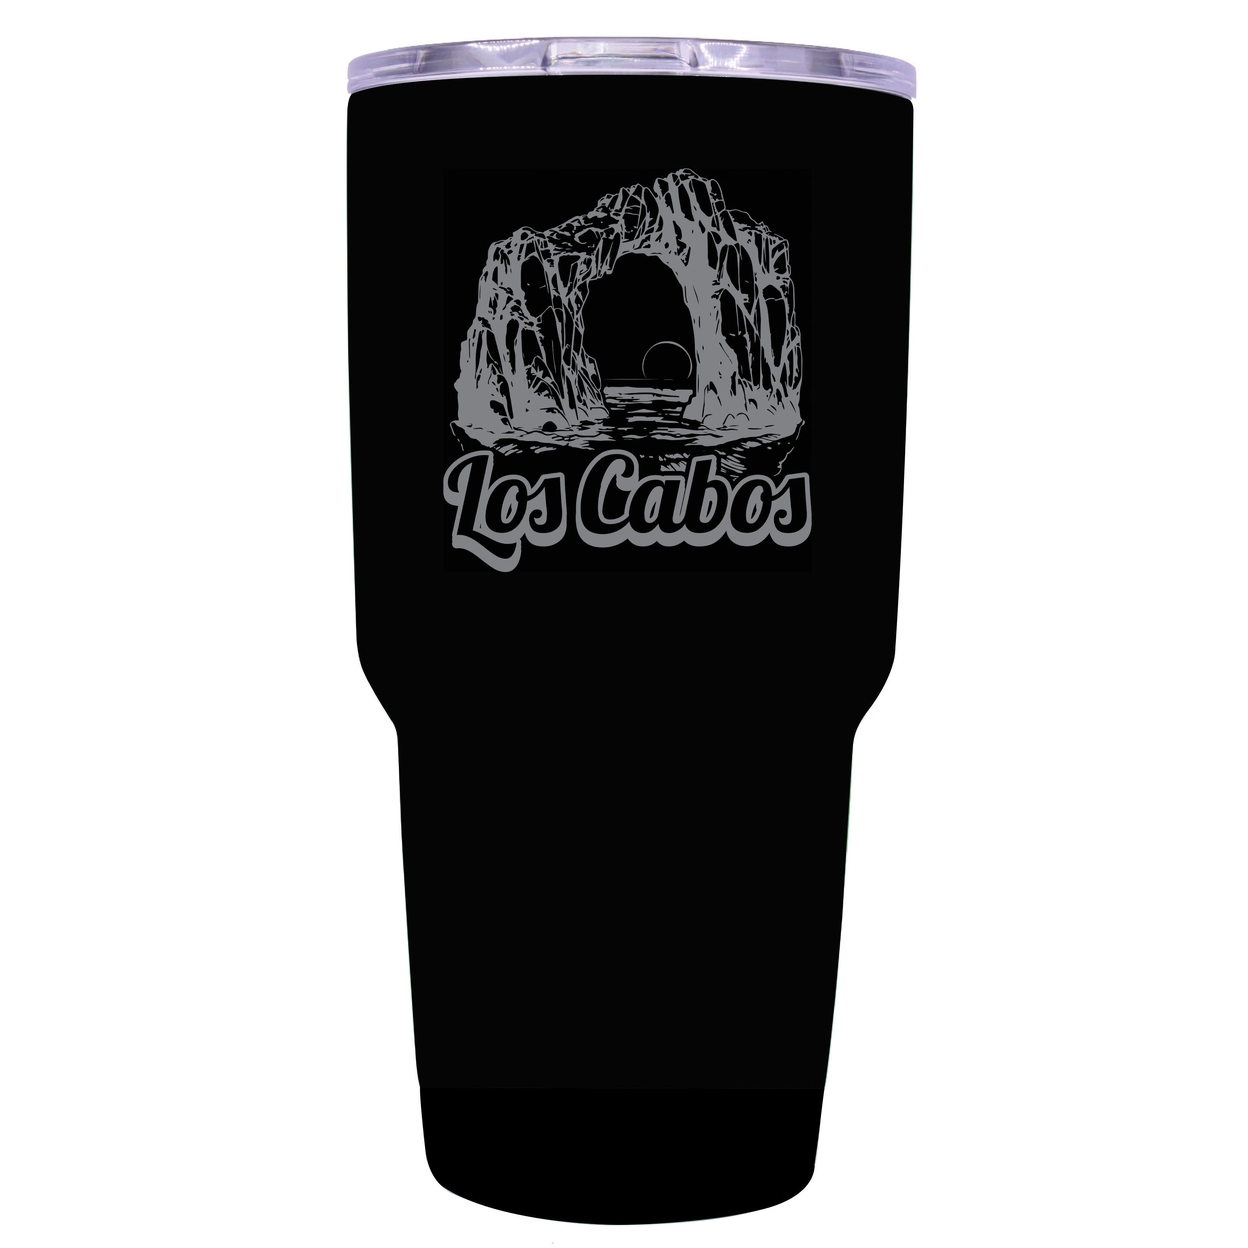 Los Cabos Mexico Souvenir 24 Oz Engraved Insulated Stainless Steel Tumbler - Black,,Single Unit